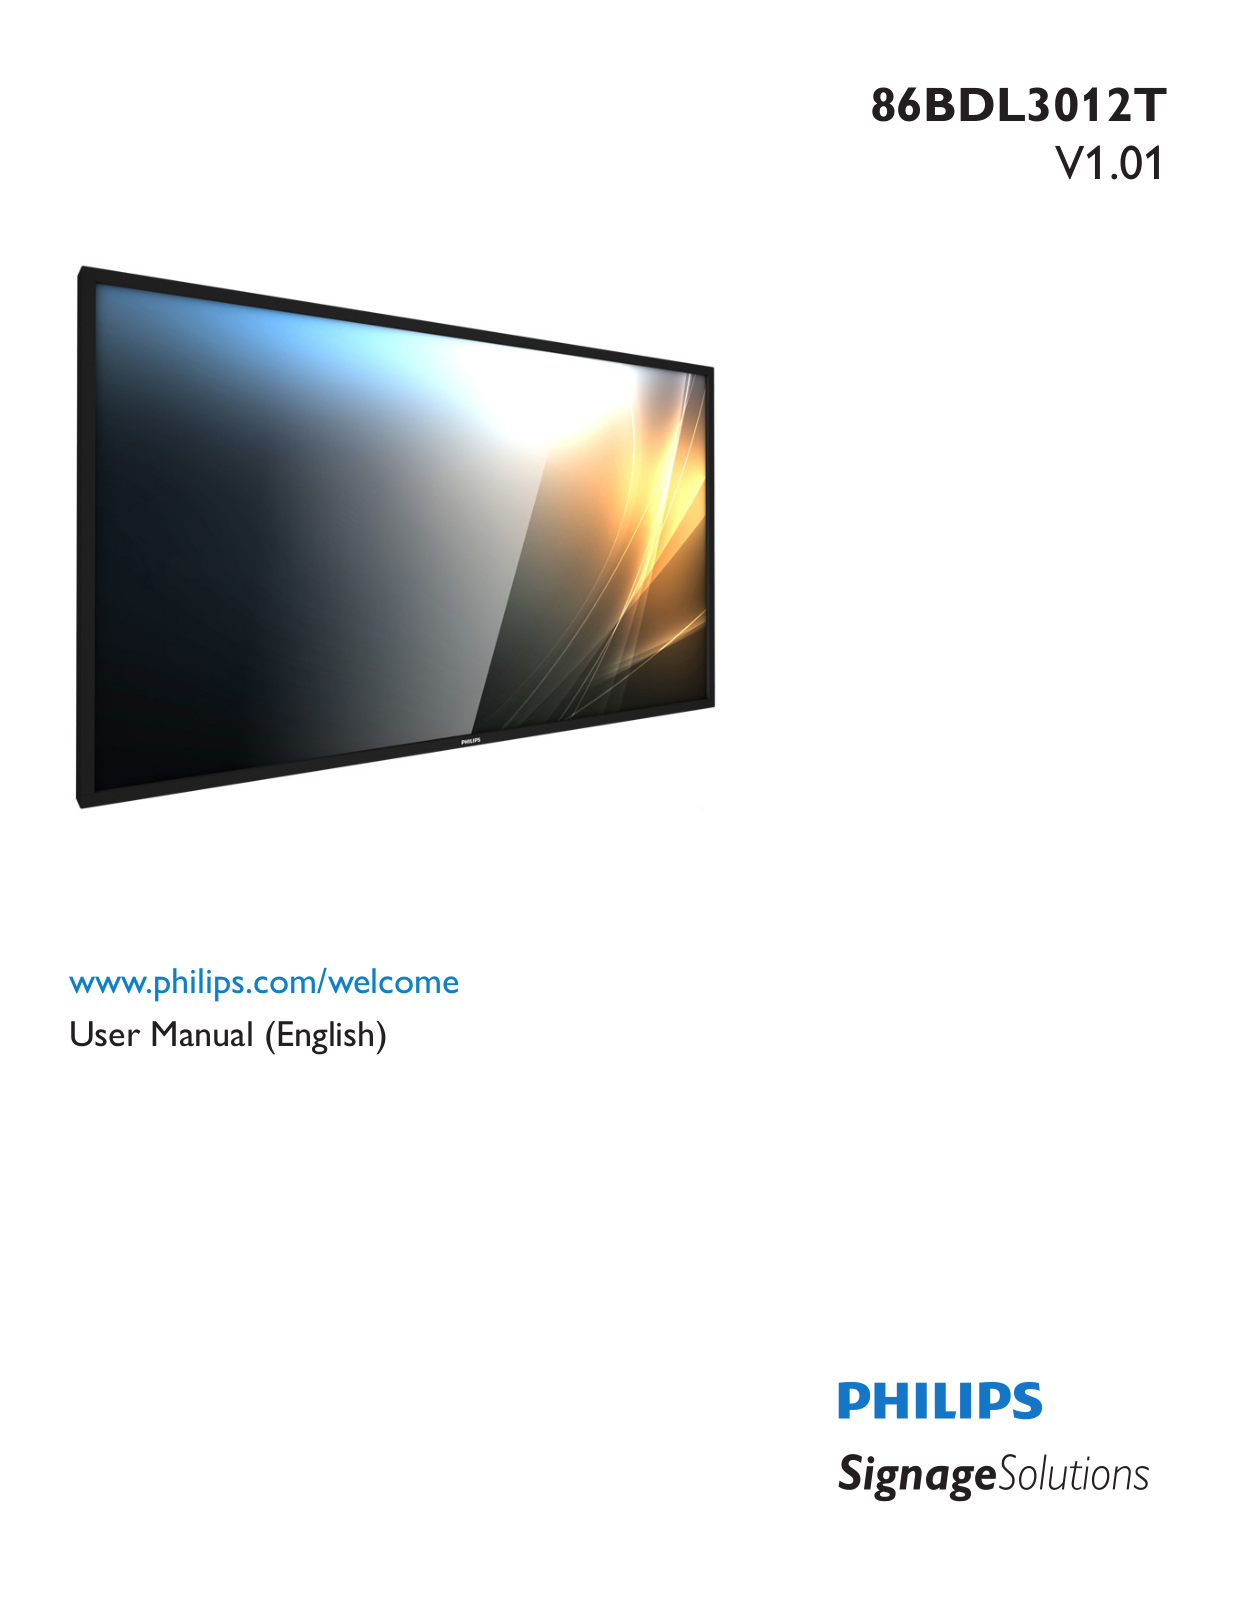 Philips 86BDL3012T operation manual